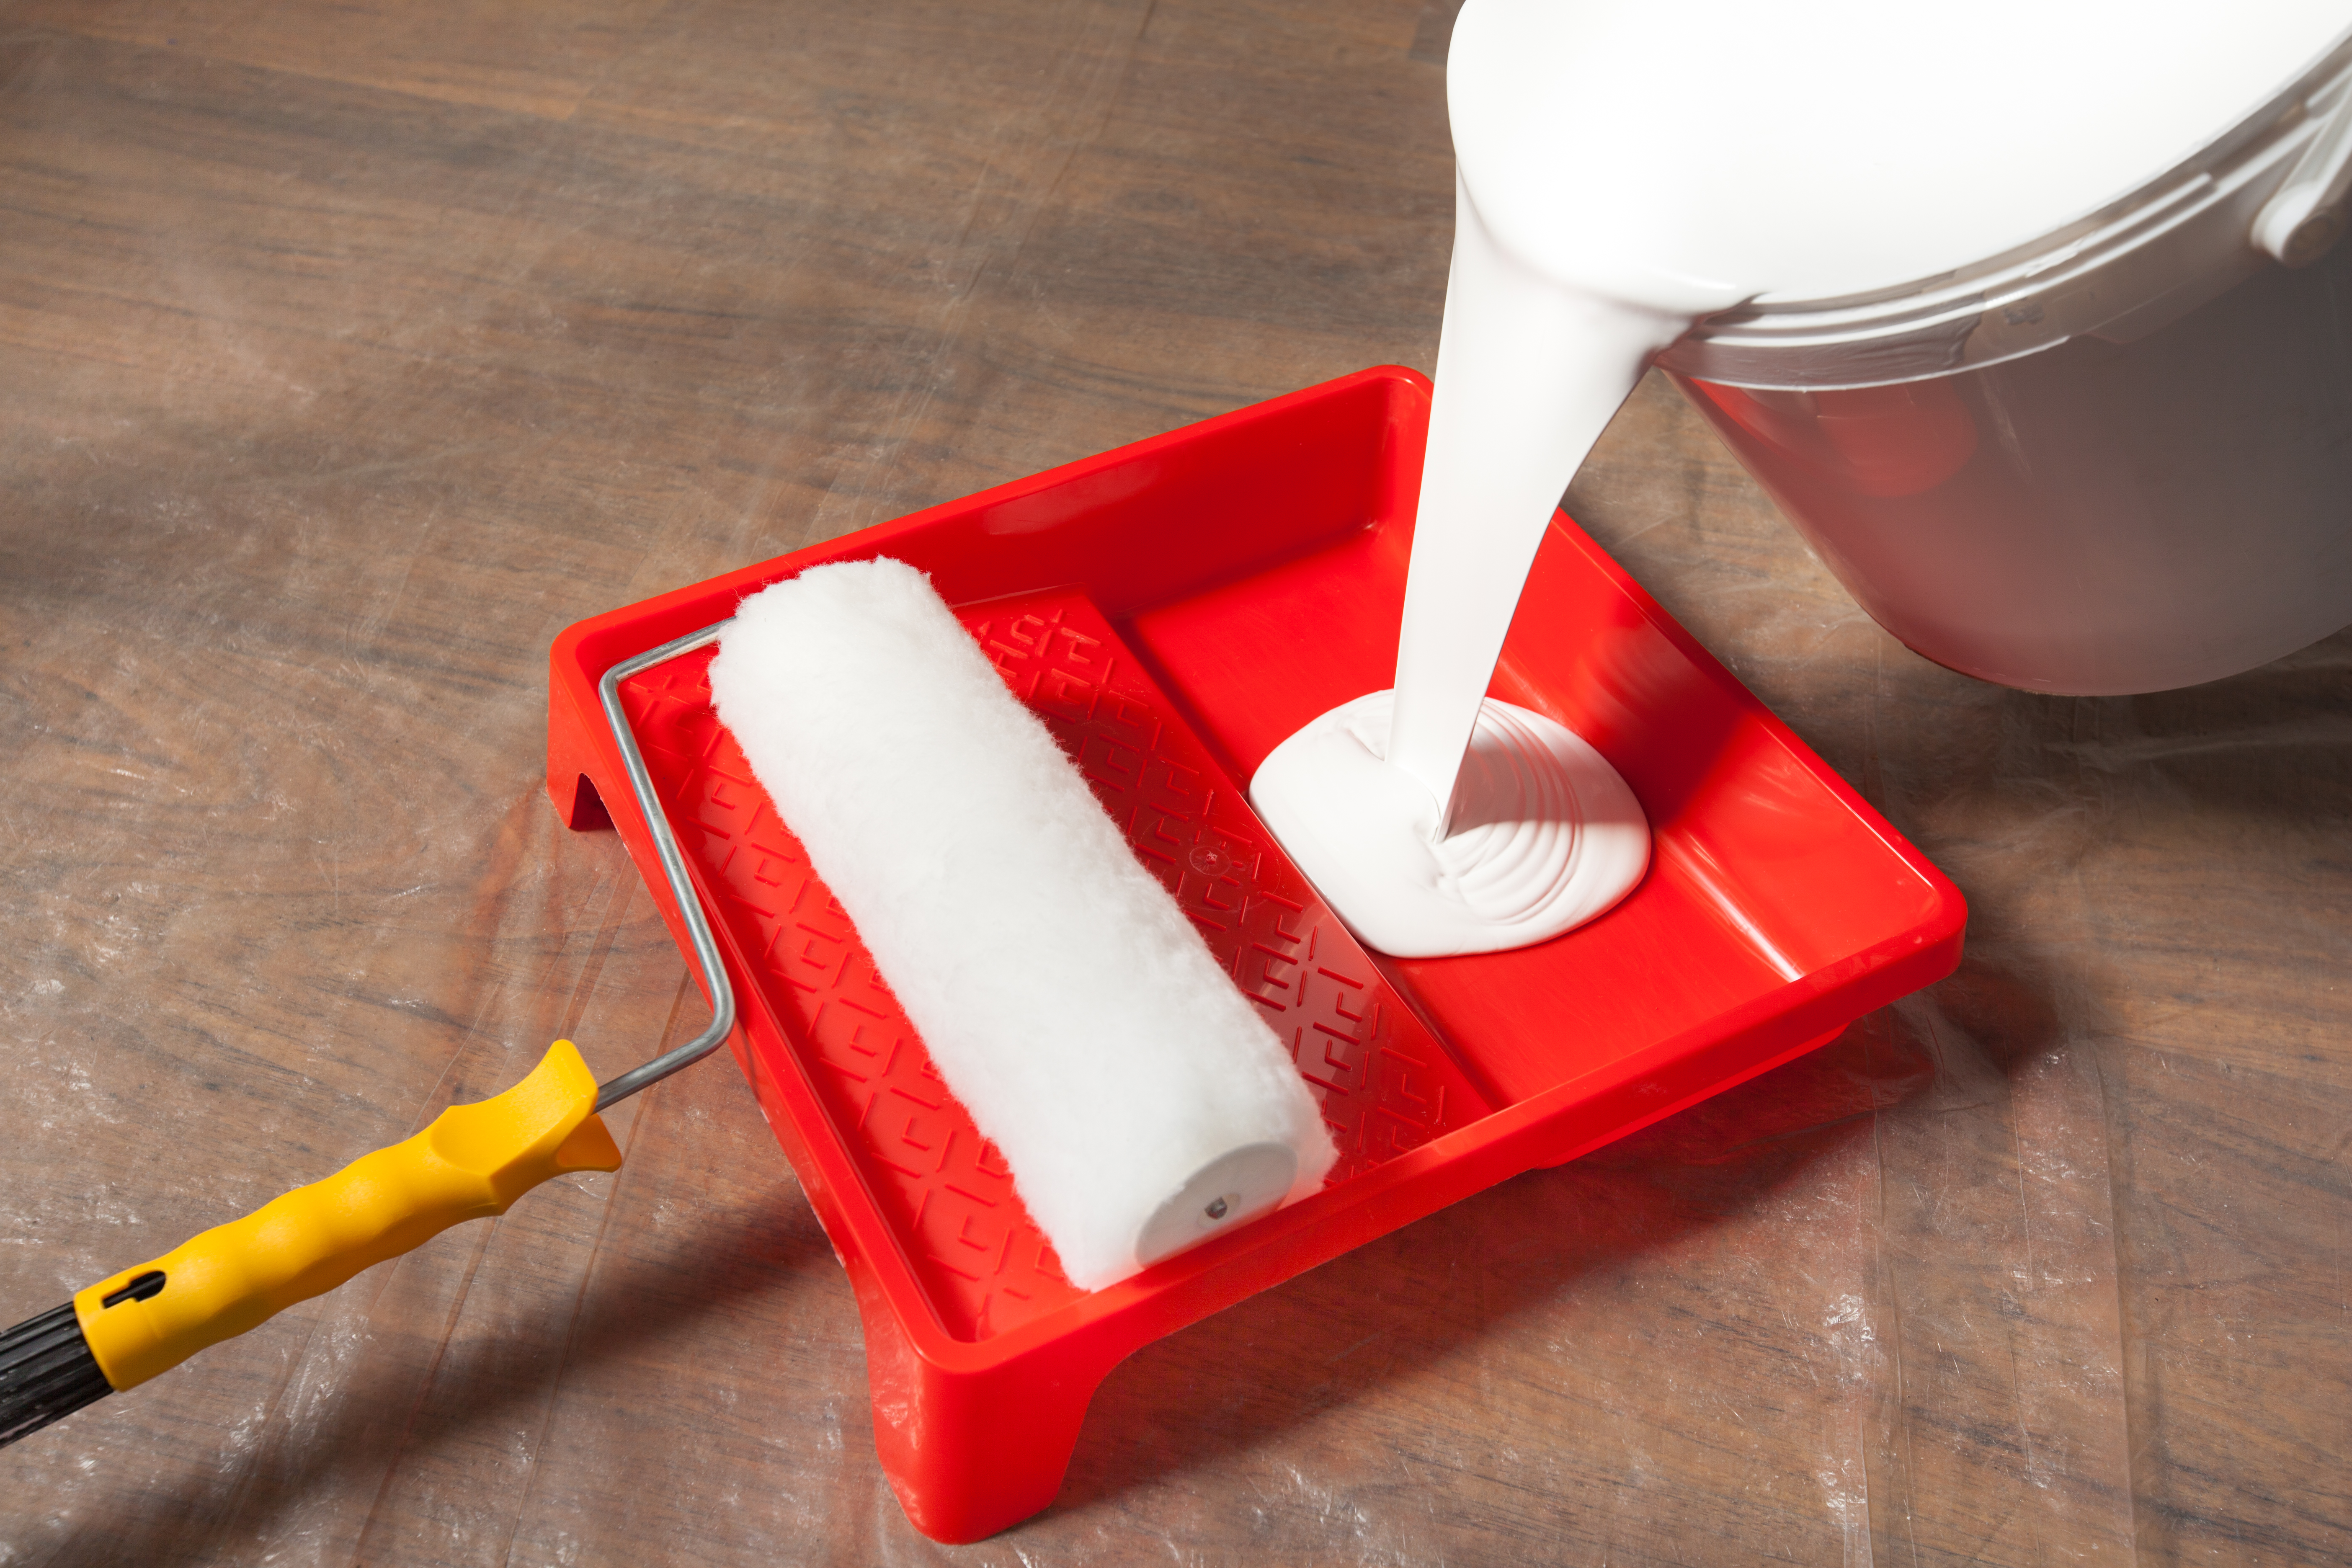 How To Pour 5 Gallon Paint How to Pour From a 5-Gallon Paint Pail | Hunker